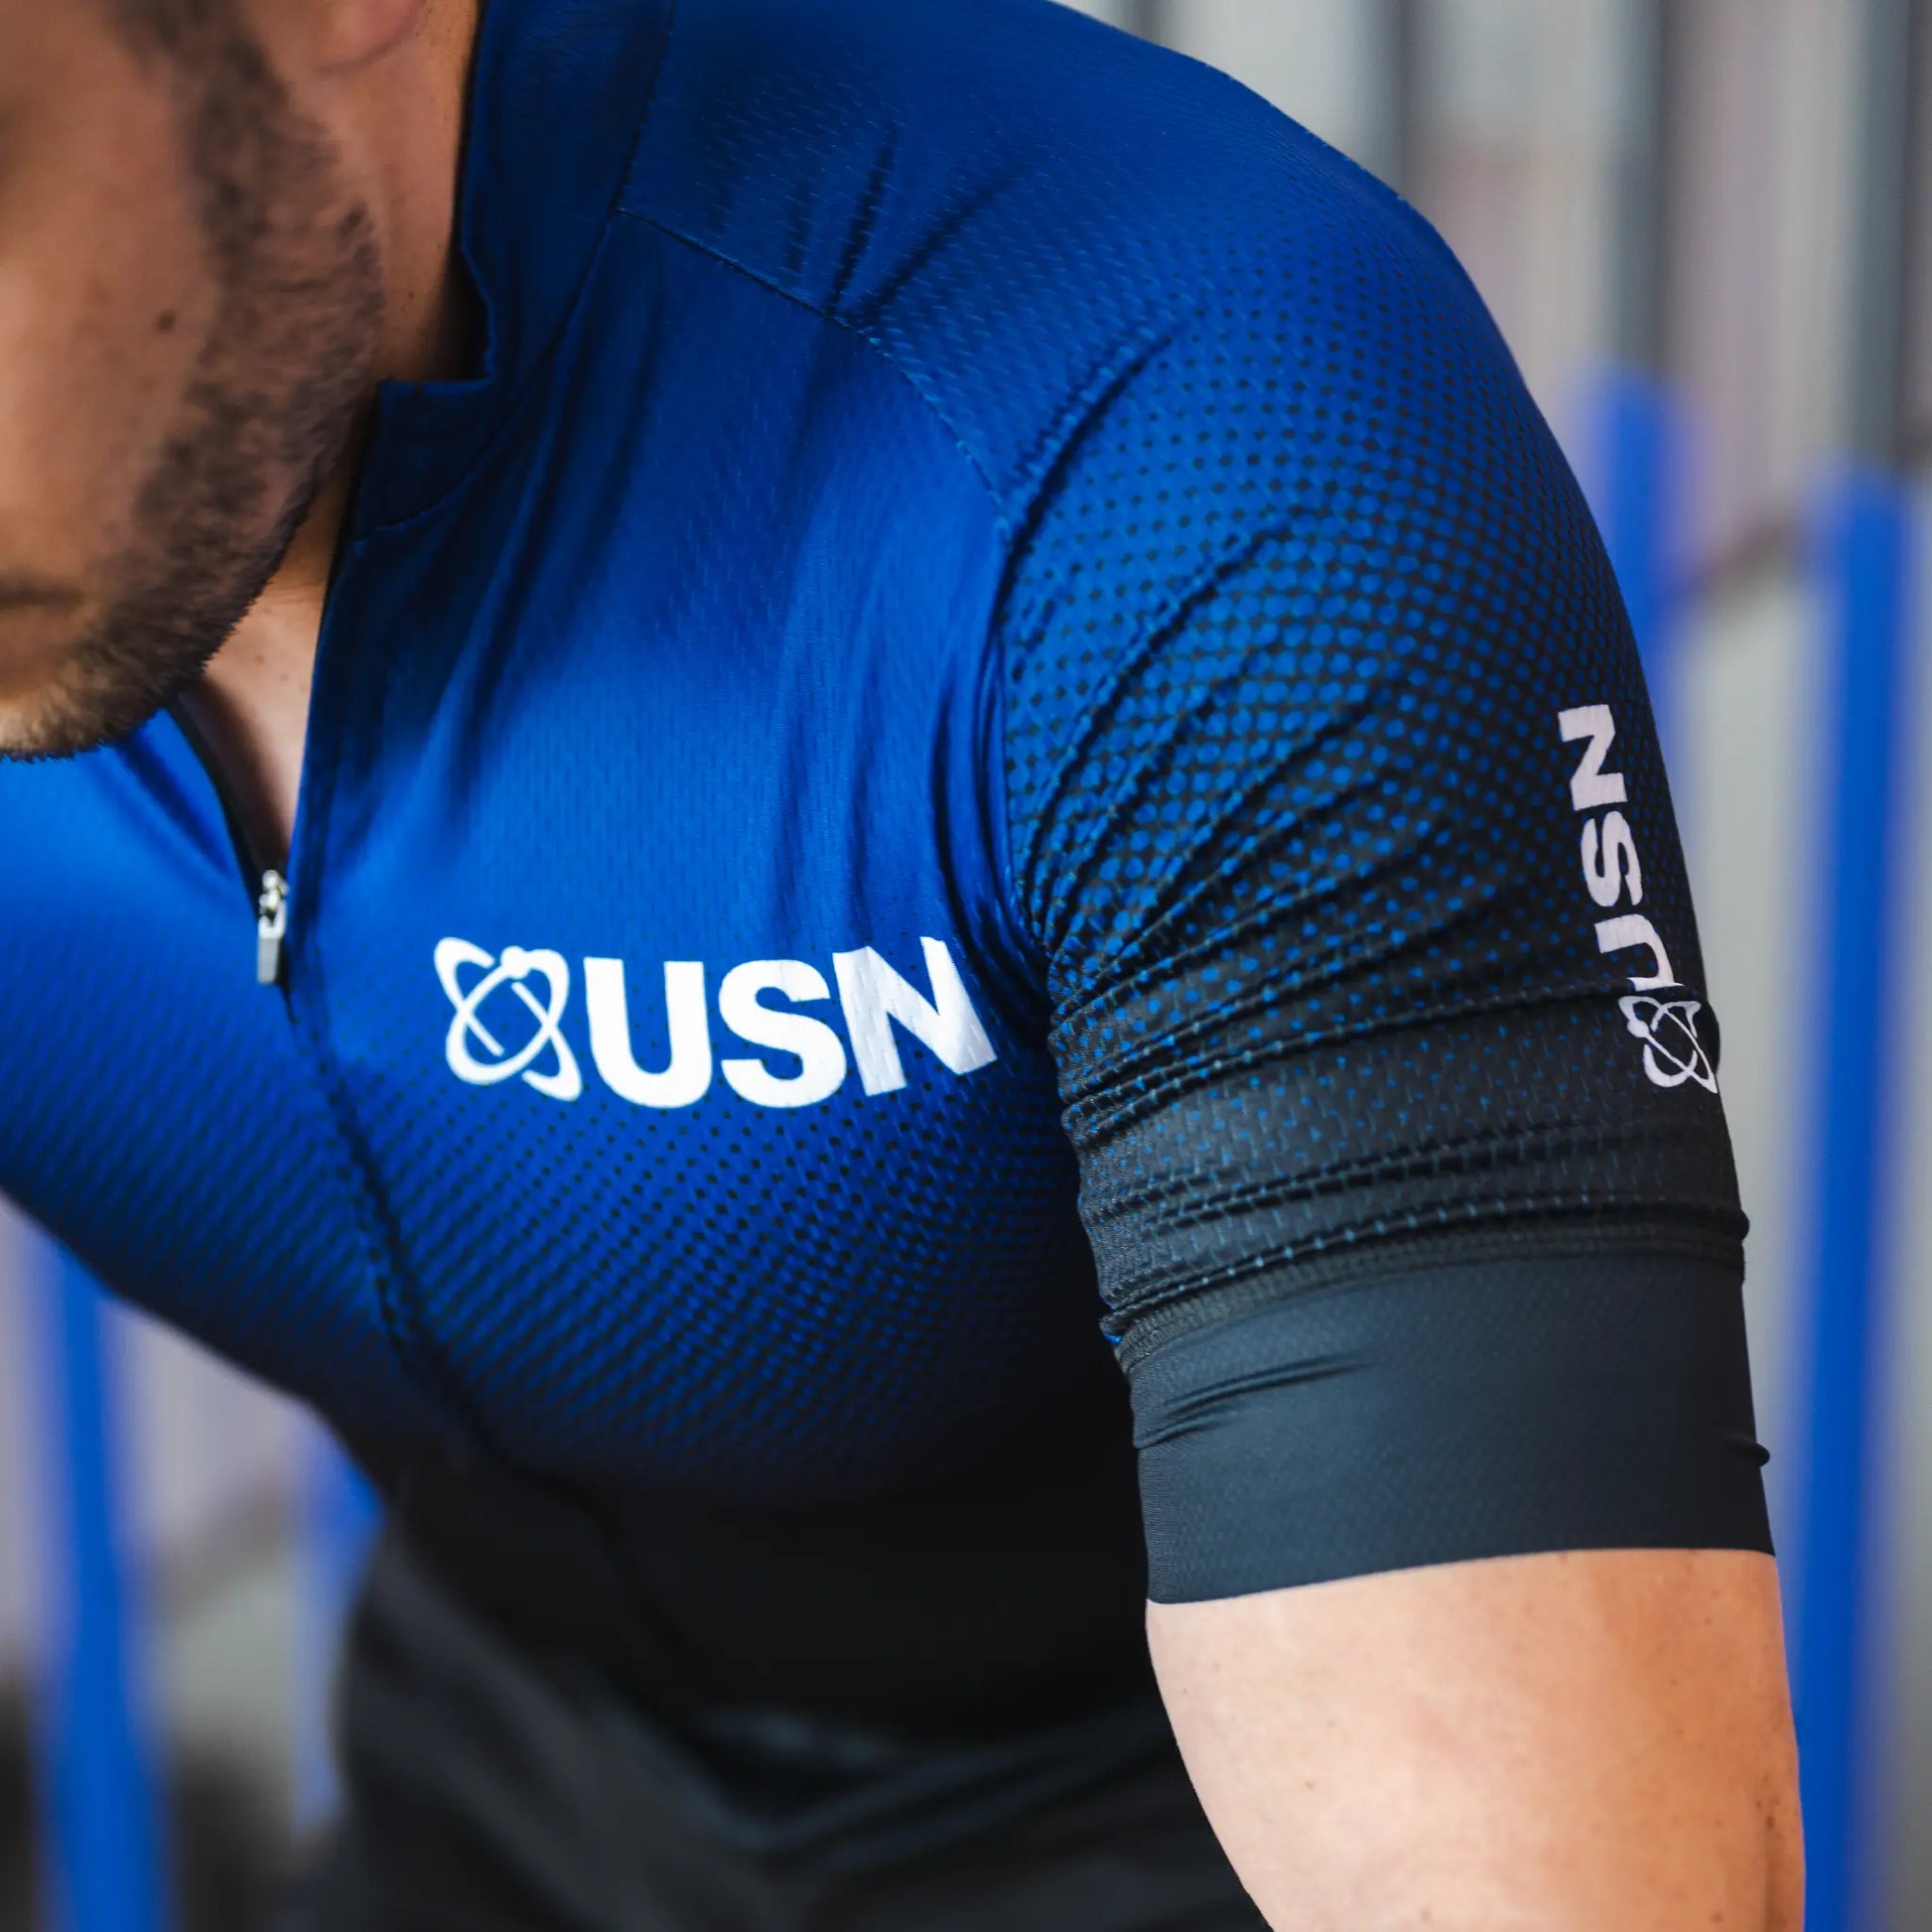 USN Cycling Shirt with model 4